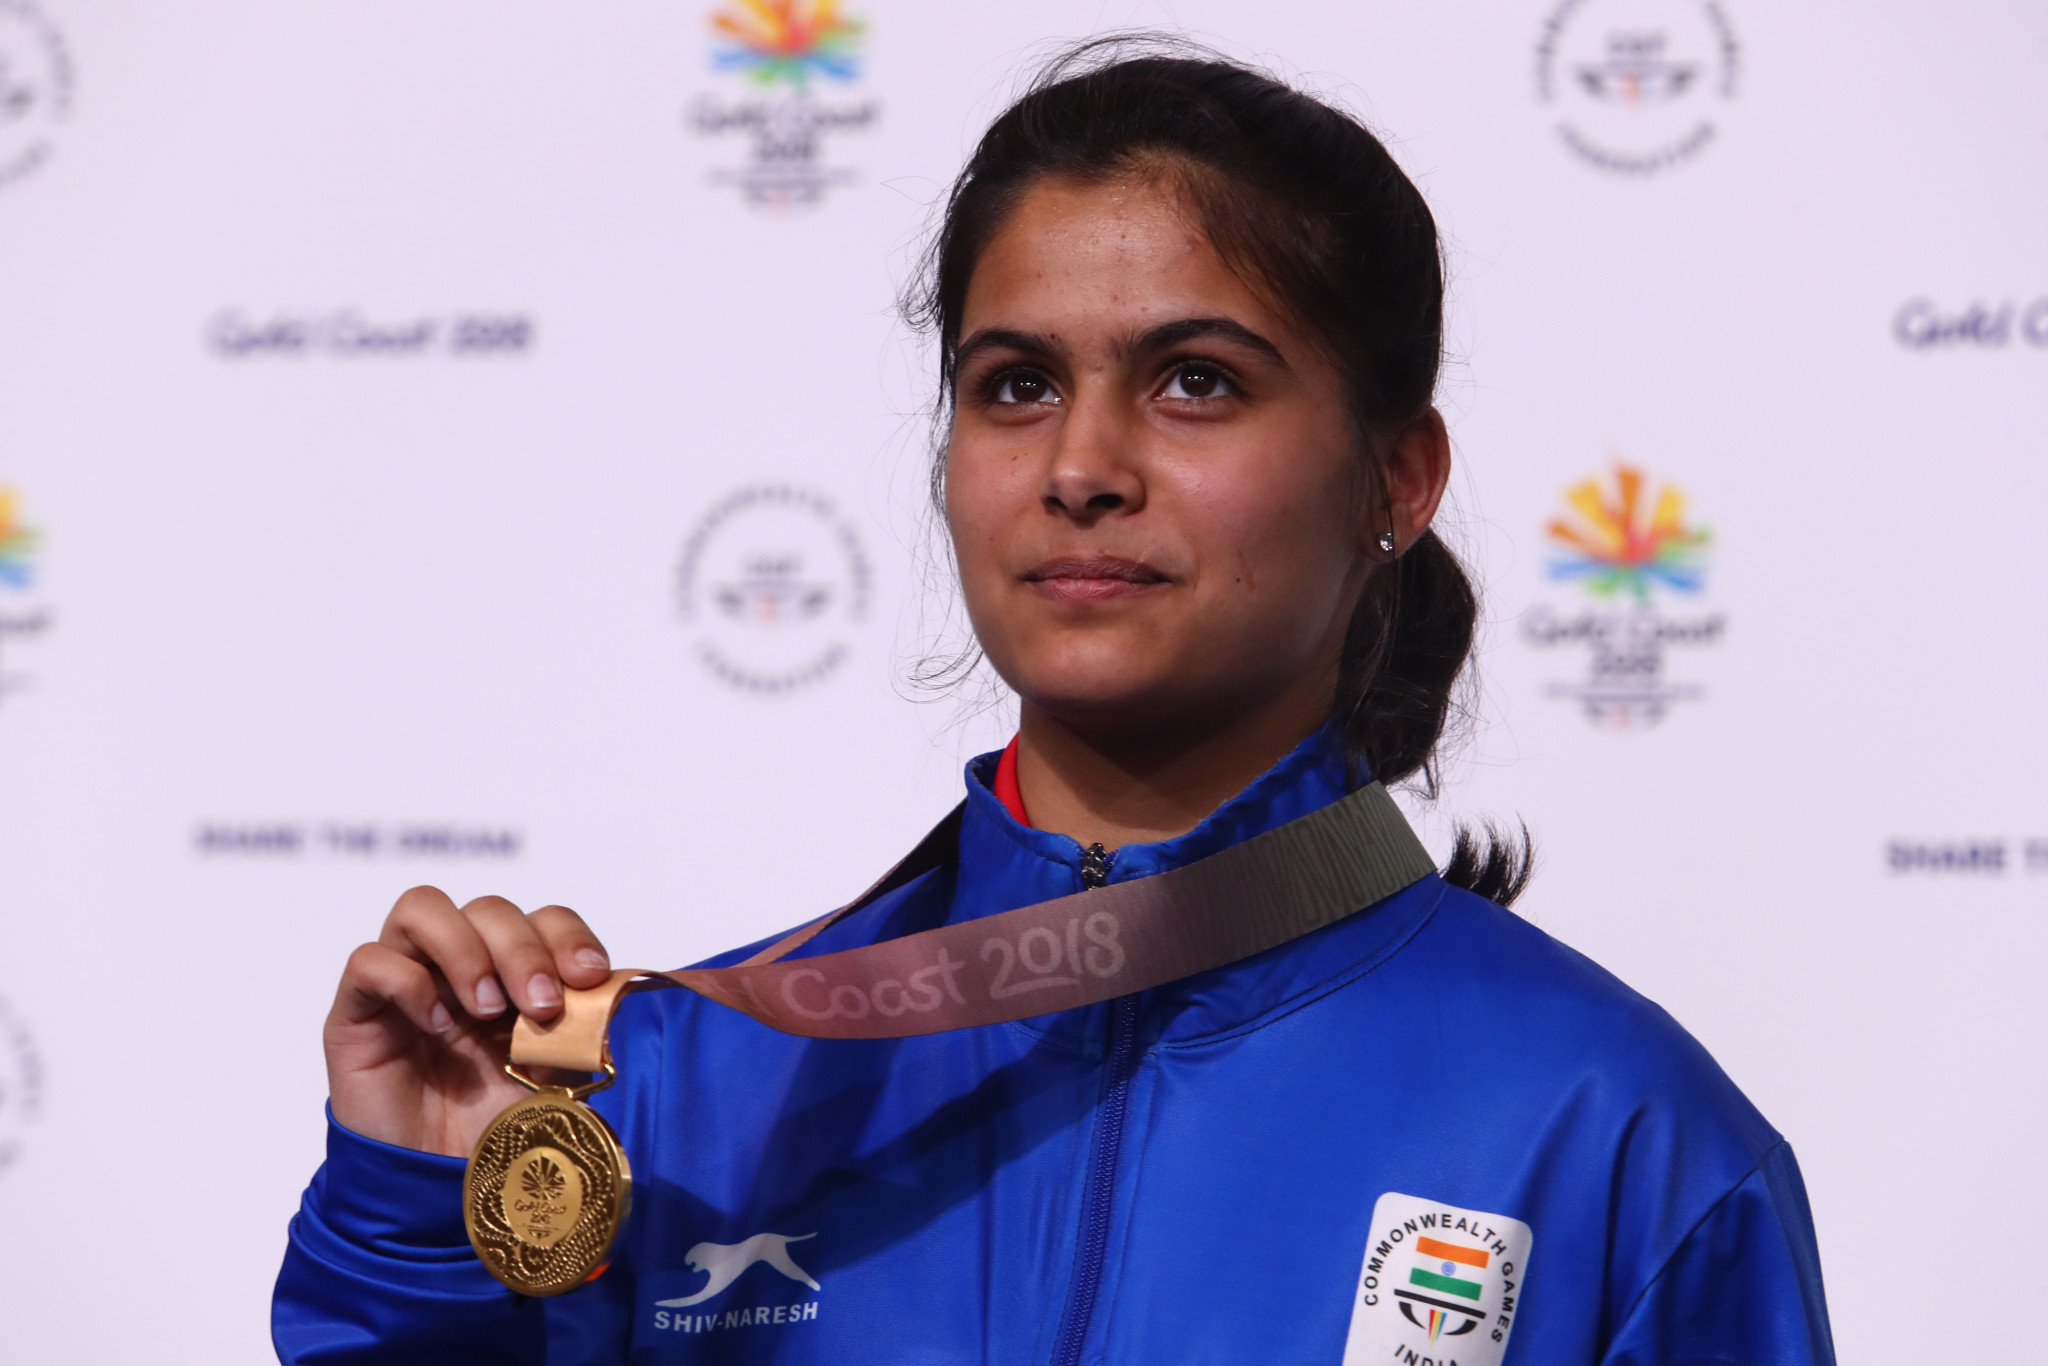 Commonwealth Games shooting gold medallist Manu Bhaker has been chosen to carry India's flag at the Opening Ceremony of Buenos Aires 2018 ©Getty Images